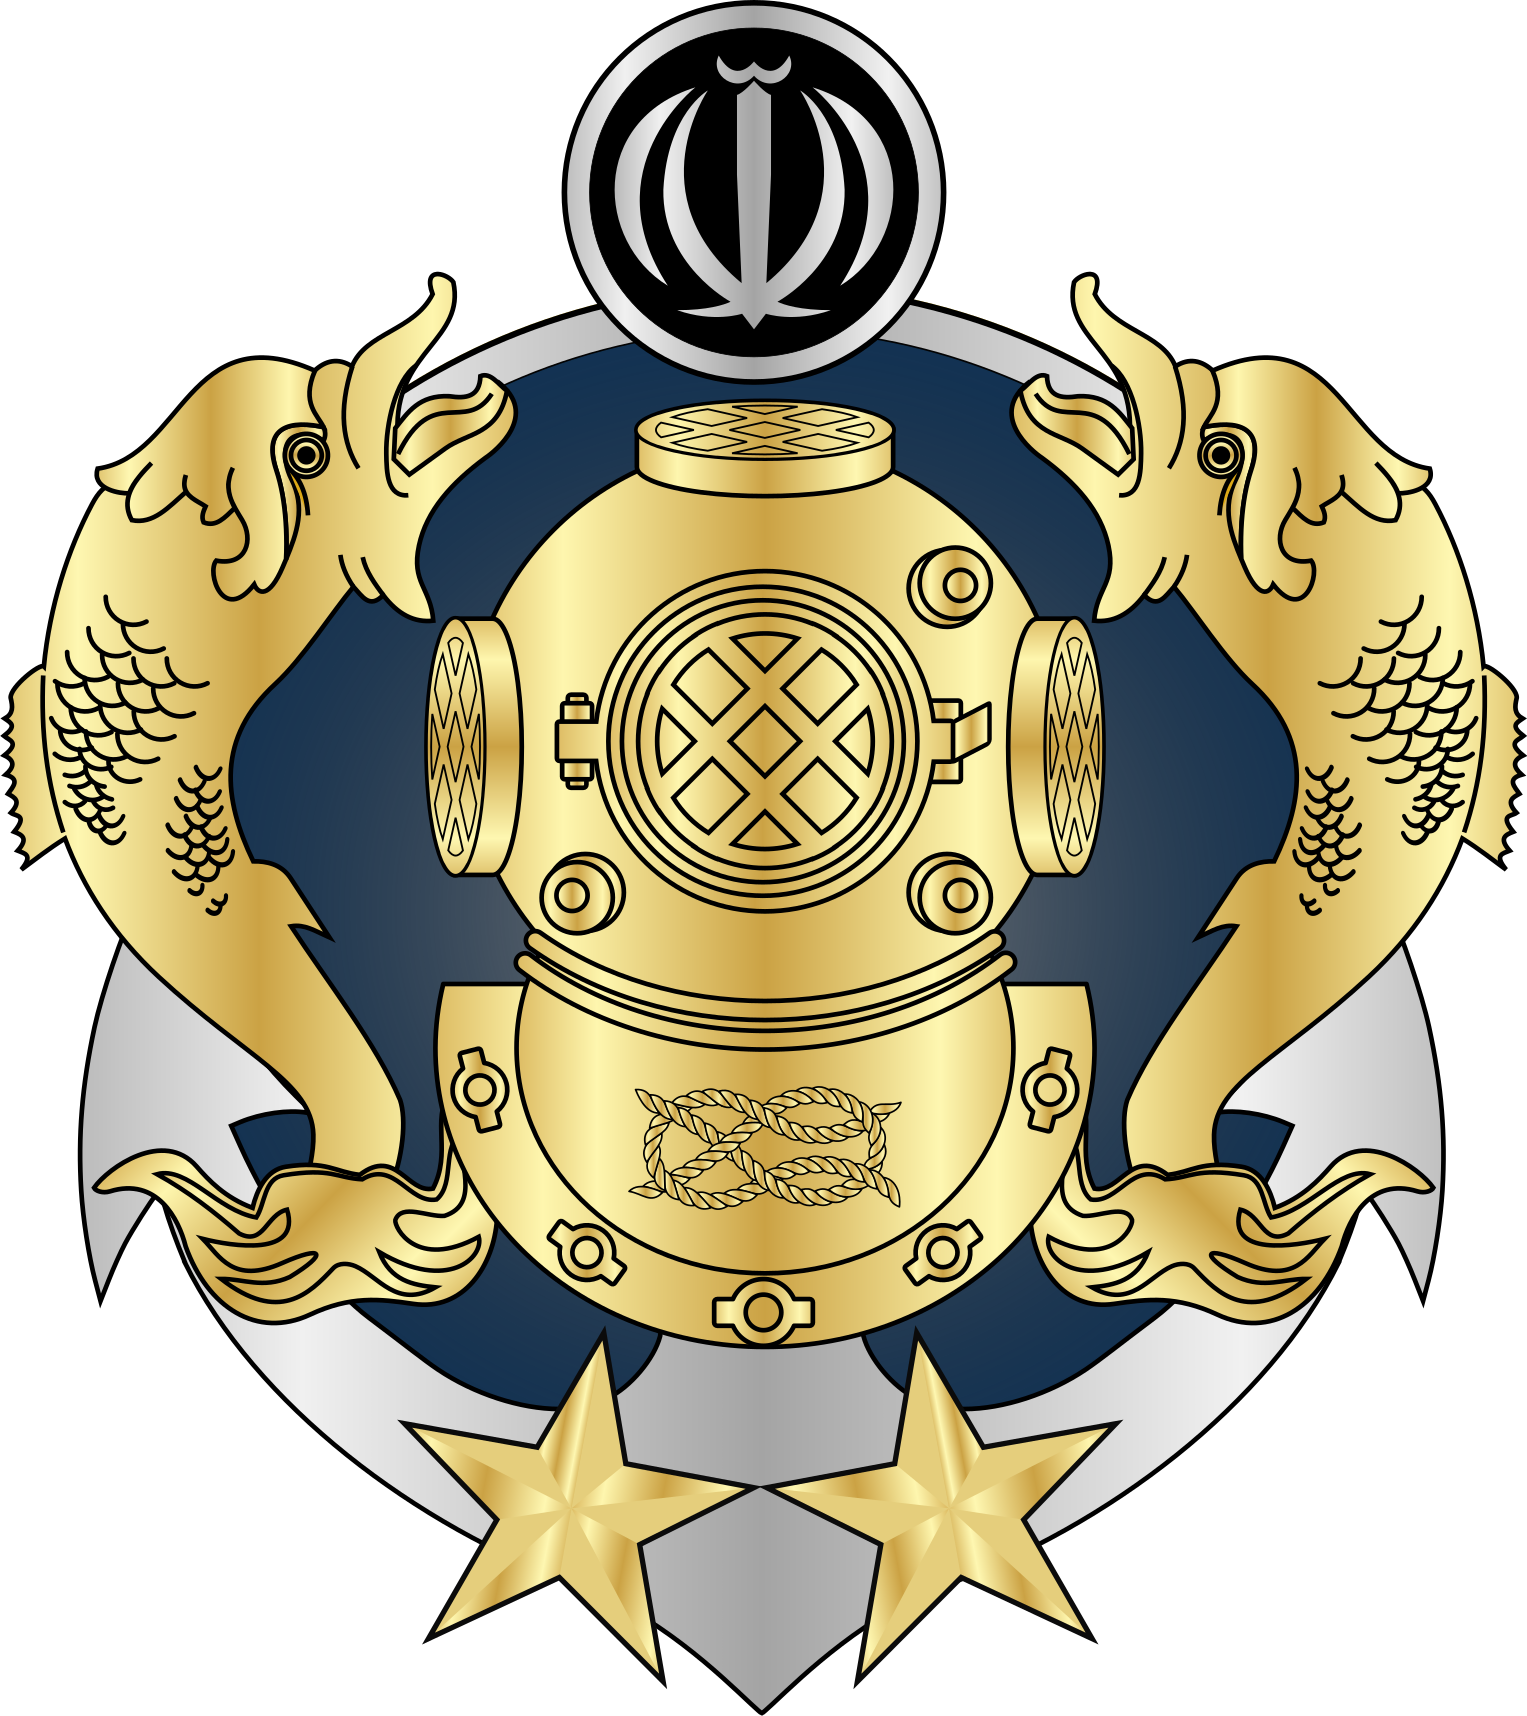 A Gold And Silver Emblem With Two Fish And A Helmet